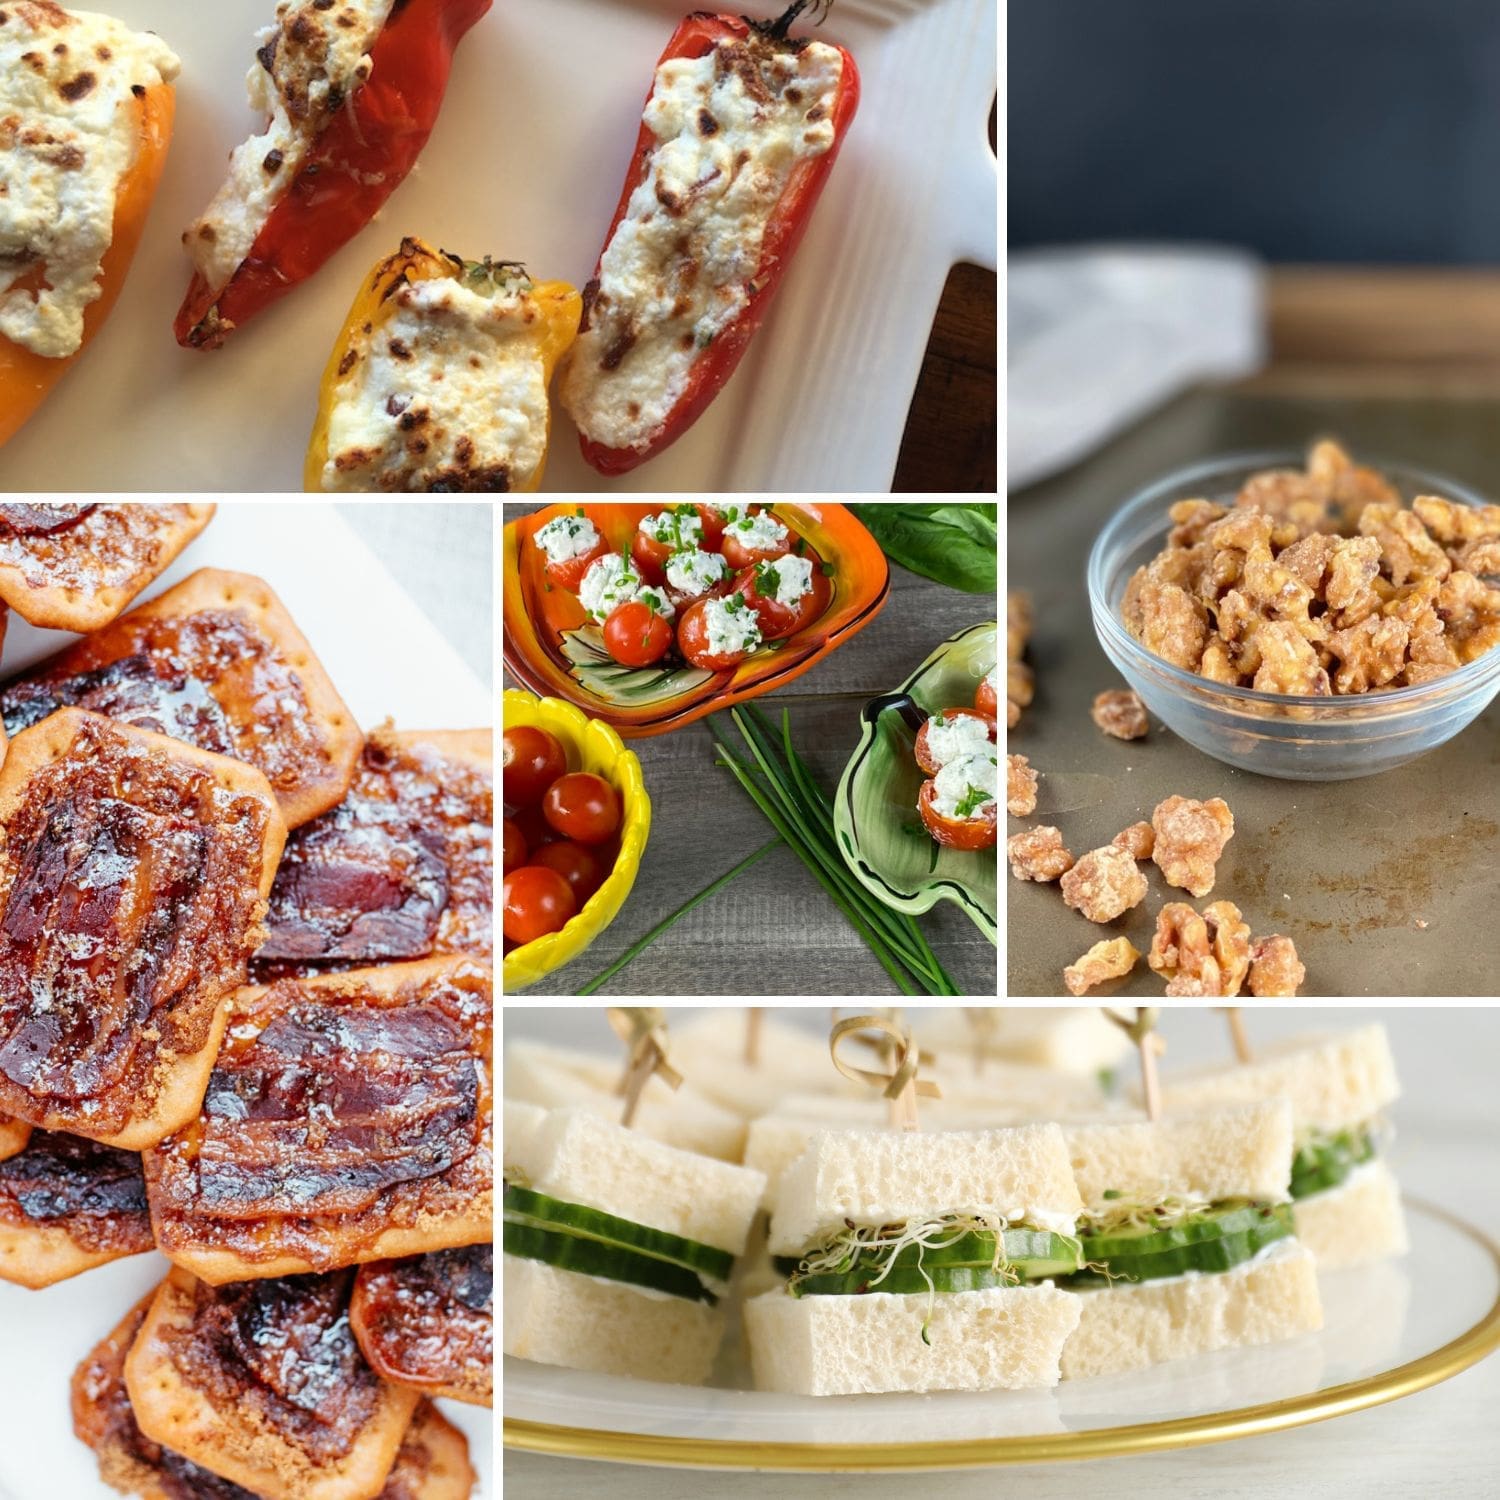 Various Thanksgiving Appetizer Inspiration including cucumber sandwiches, spiced walnuts and bacon crackers.